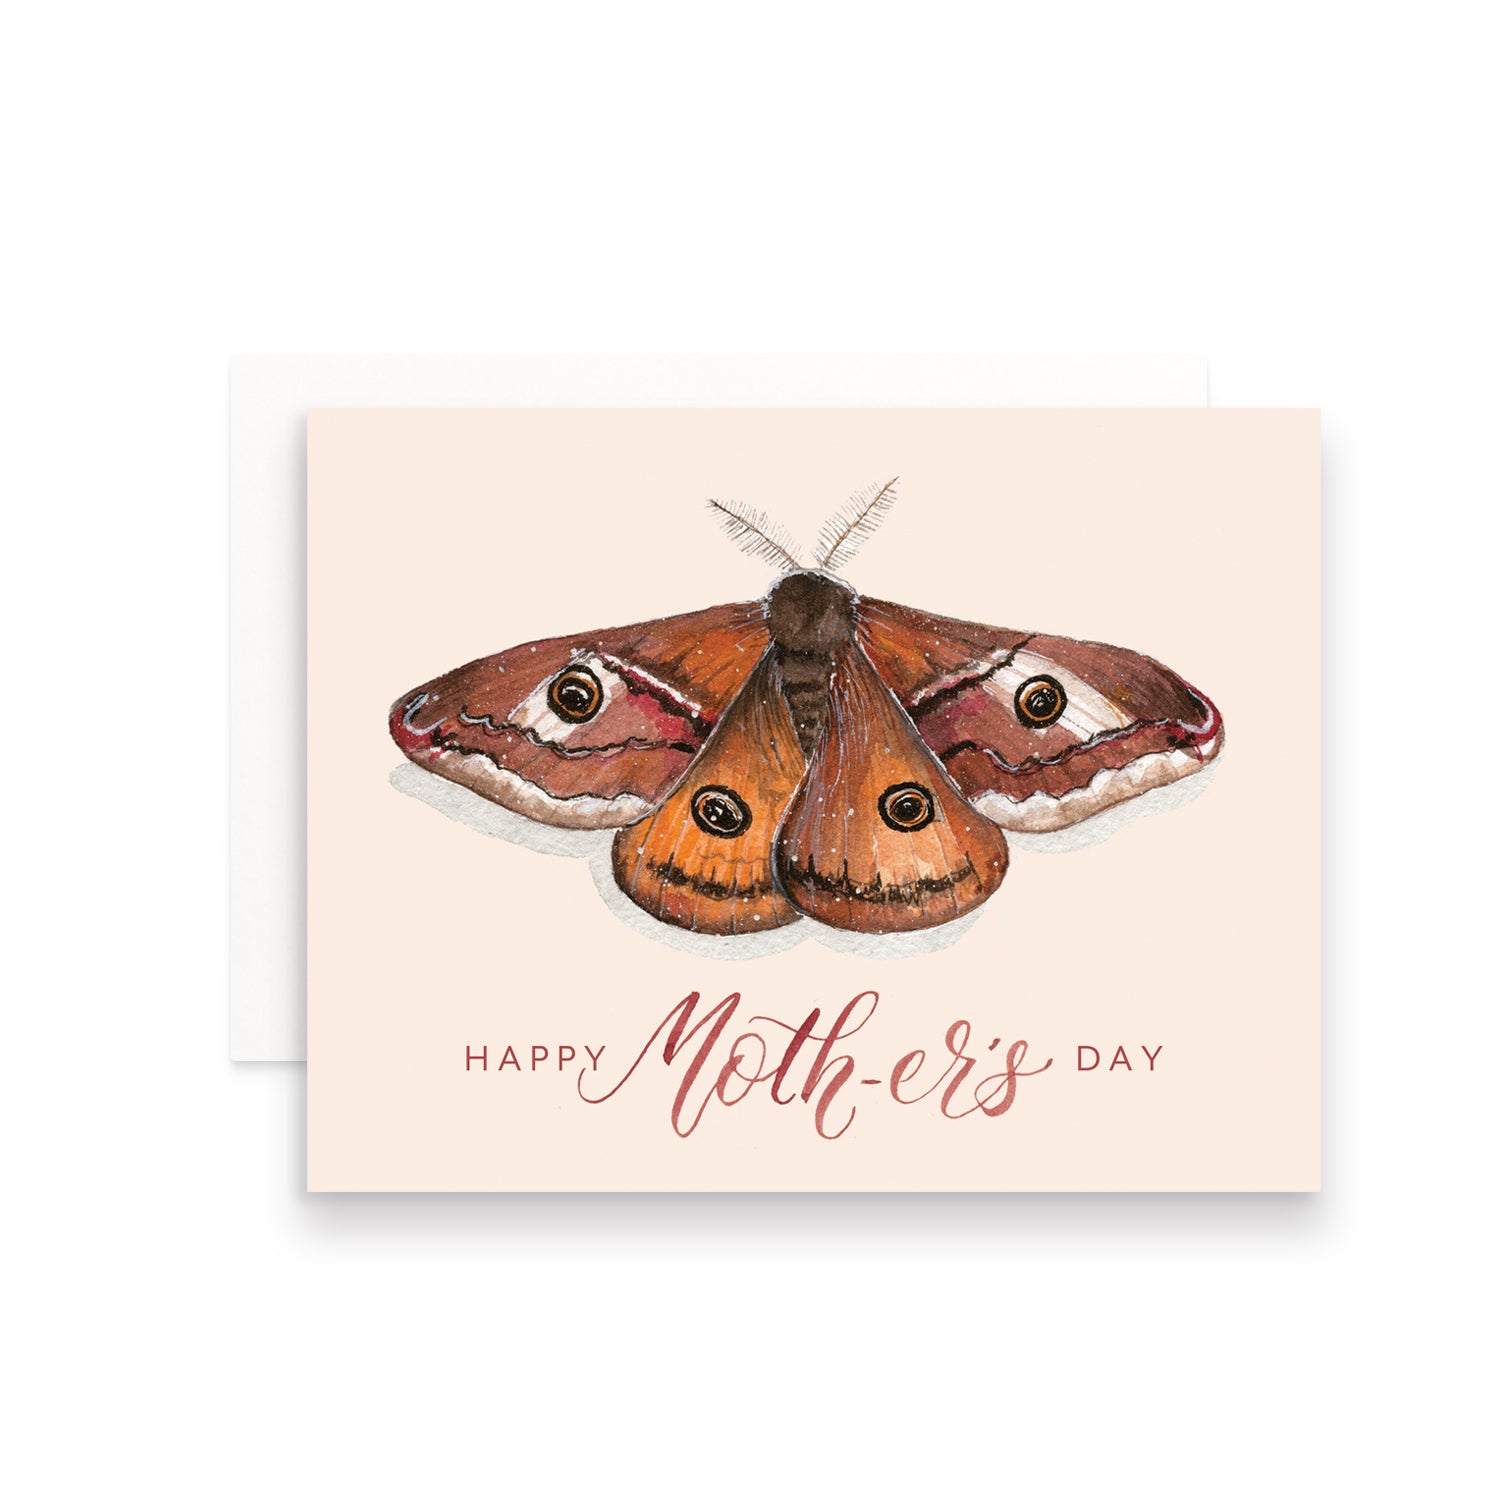 Happy Moth-er's Day Greeting Card